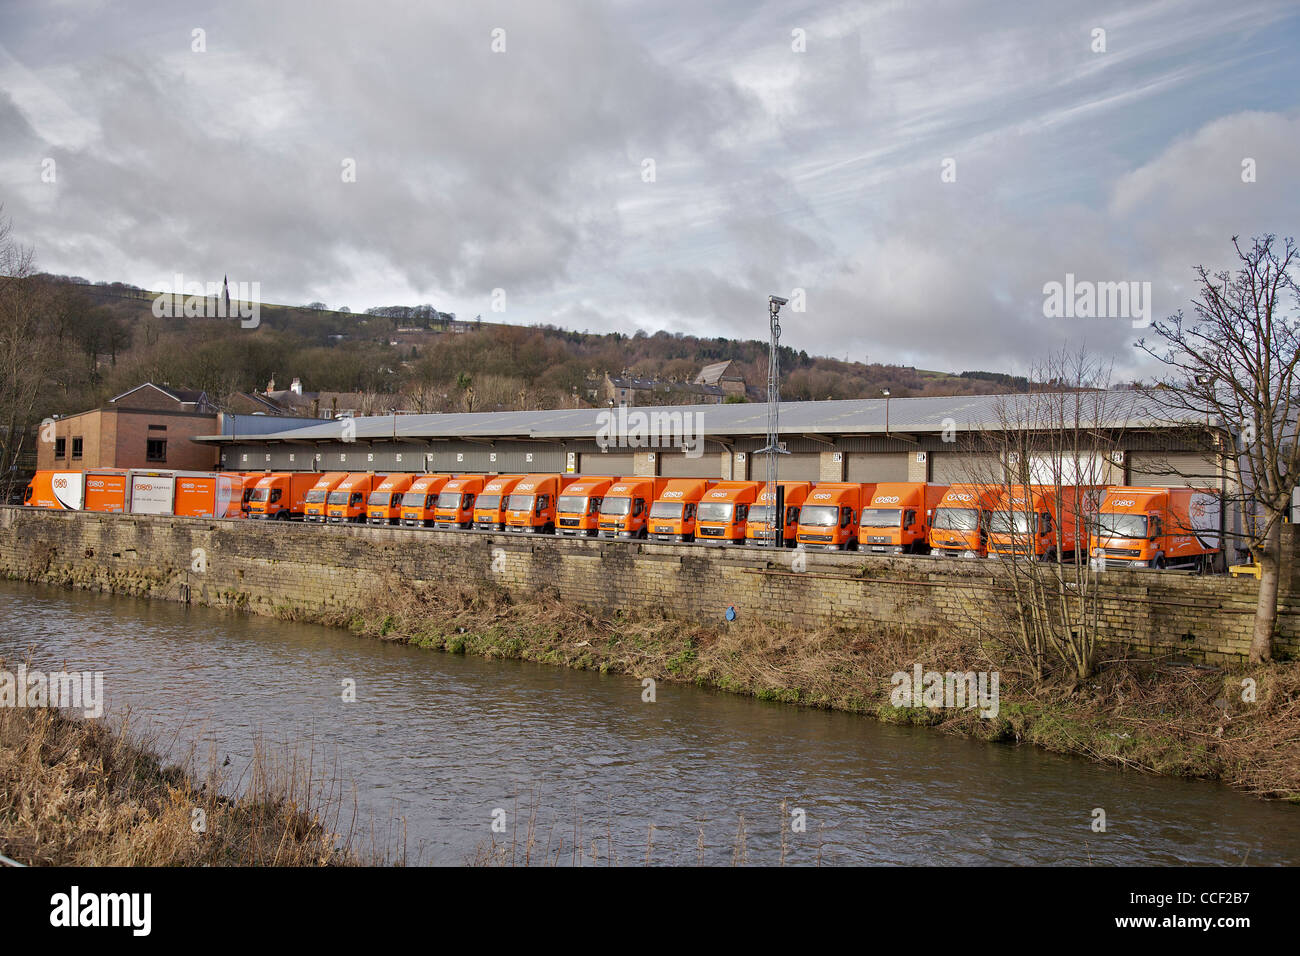 The TNT freight transport depot in Ramsbottom with a line of lorries. Stock Photo